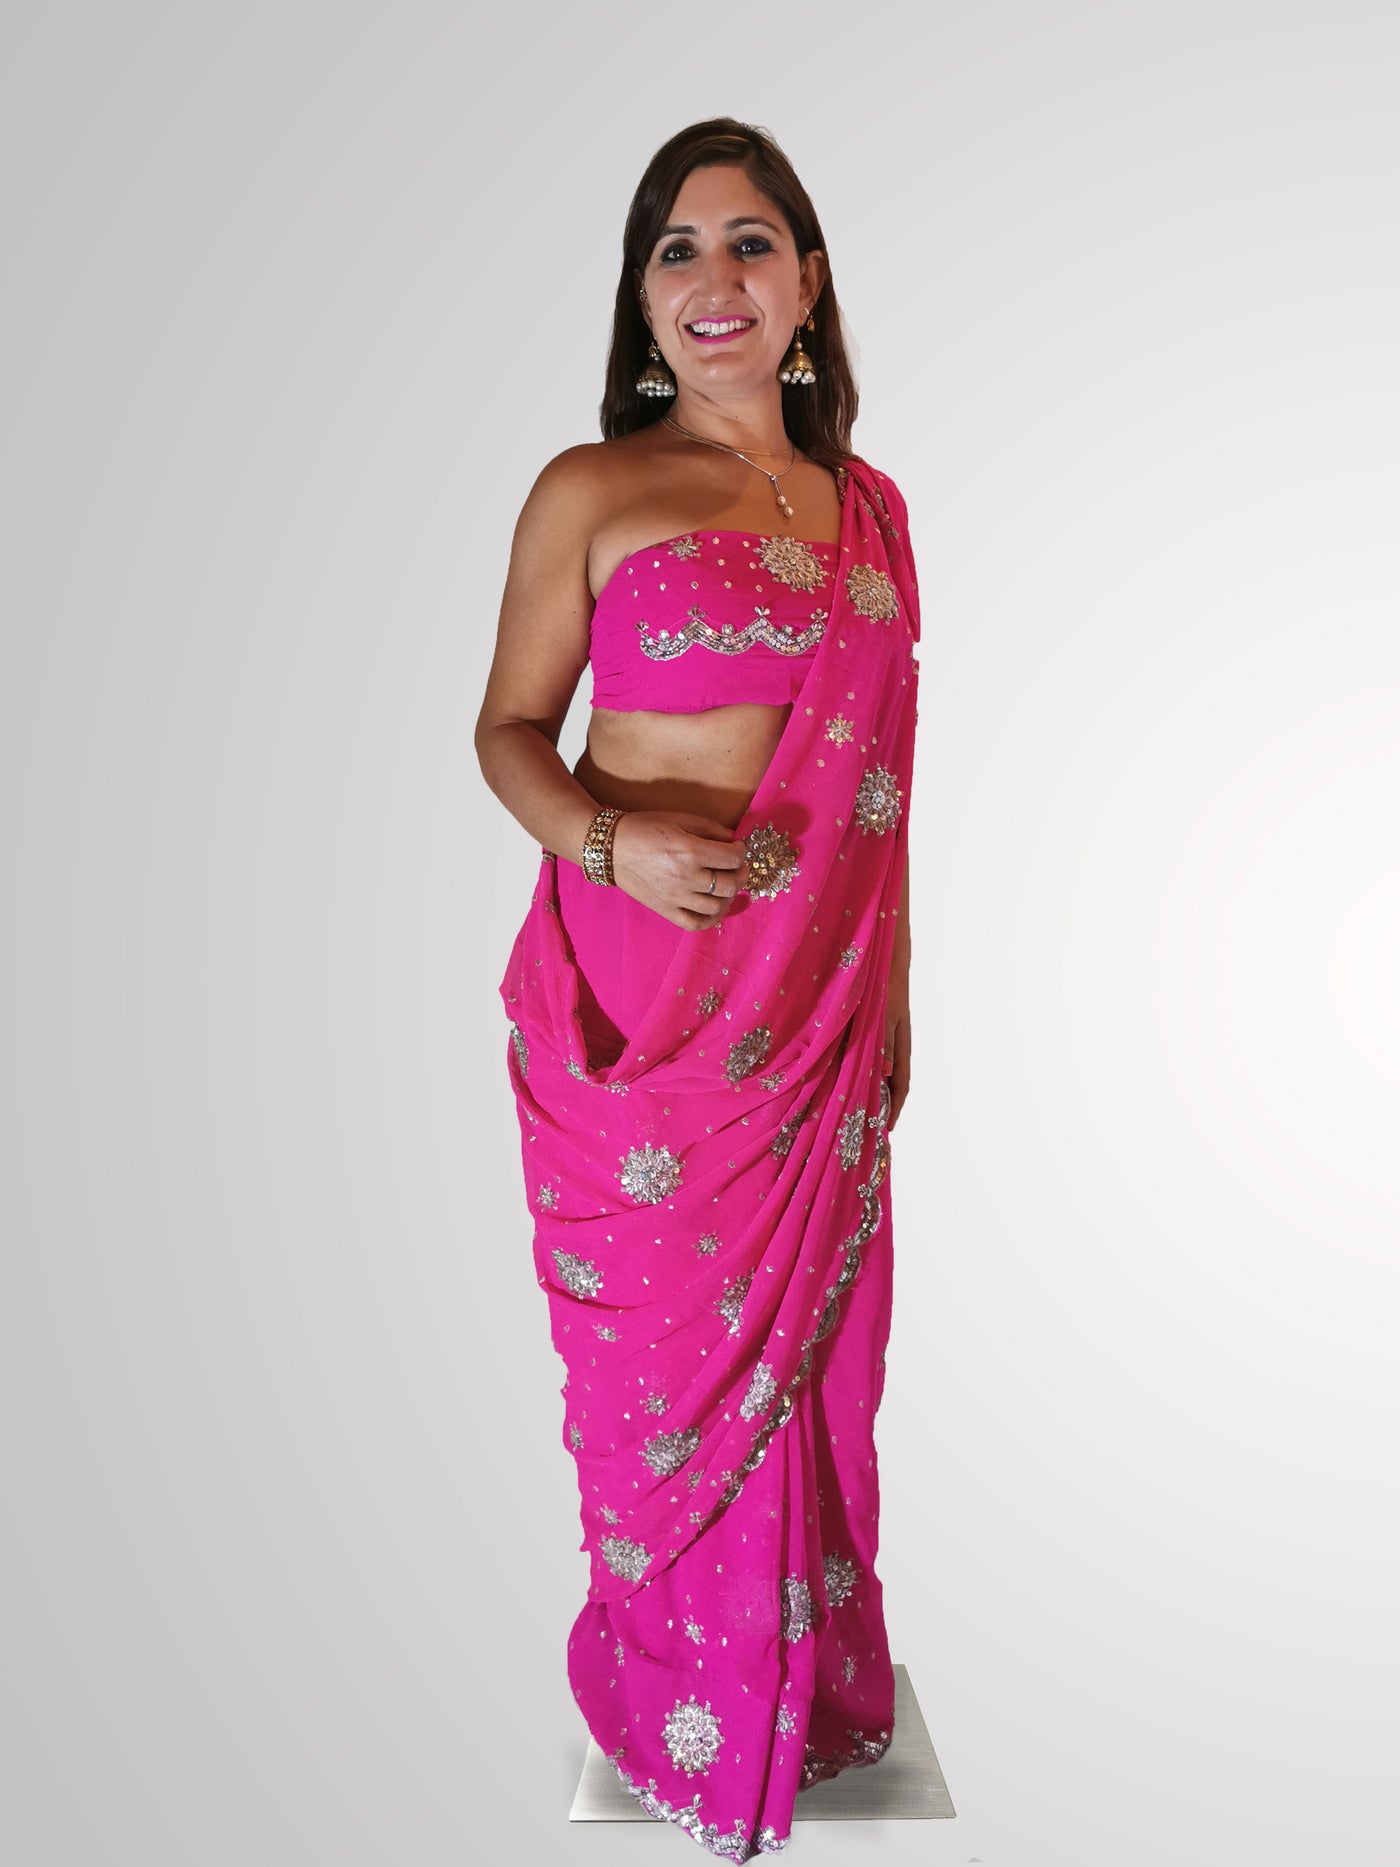 Saree in Magenta Pink Georgette with Heavy Sequin Work Indian Clothing in Denver, CO, Aurora, CO, Boulder, CO, Fort Collins, CO, Colorado Springs, CO, Parker, CO, Highlands Ranch, CO, Cherry Creek, CO, Centennial, CO, and Longmont, CO. NATIONWIDE SHIPPING USA- India Fashion X